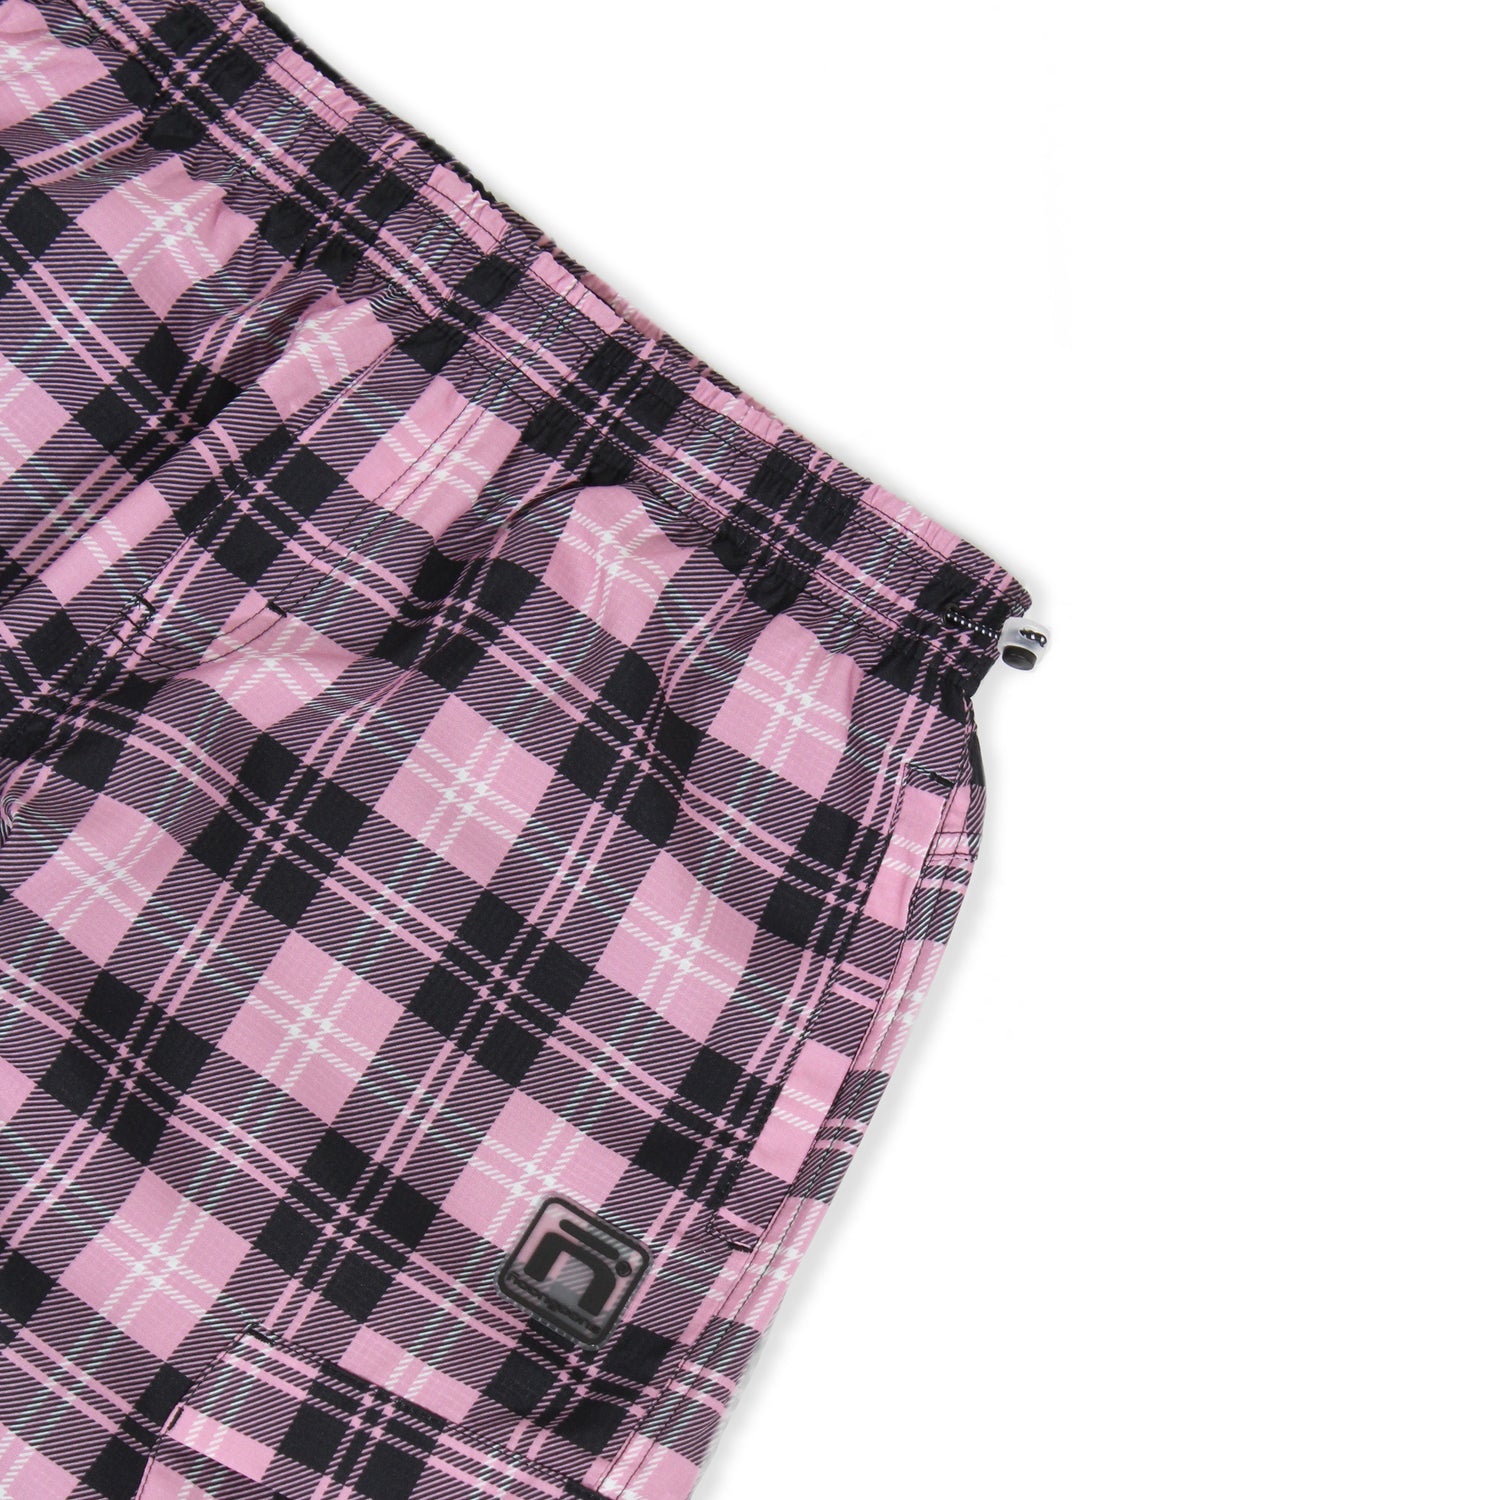 Interlude Cinch Pant - Pink